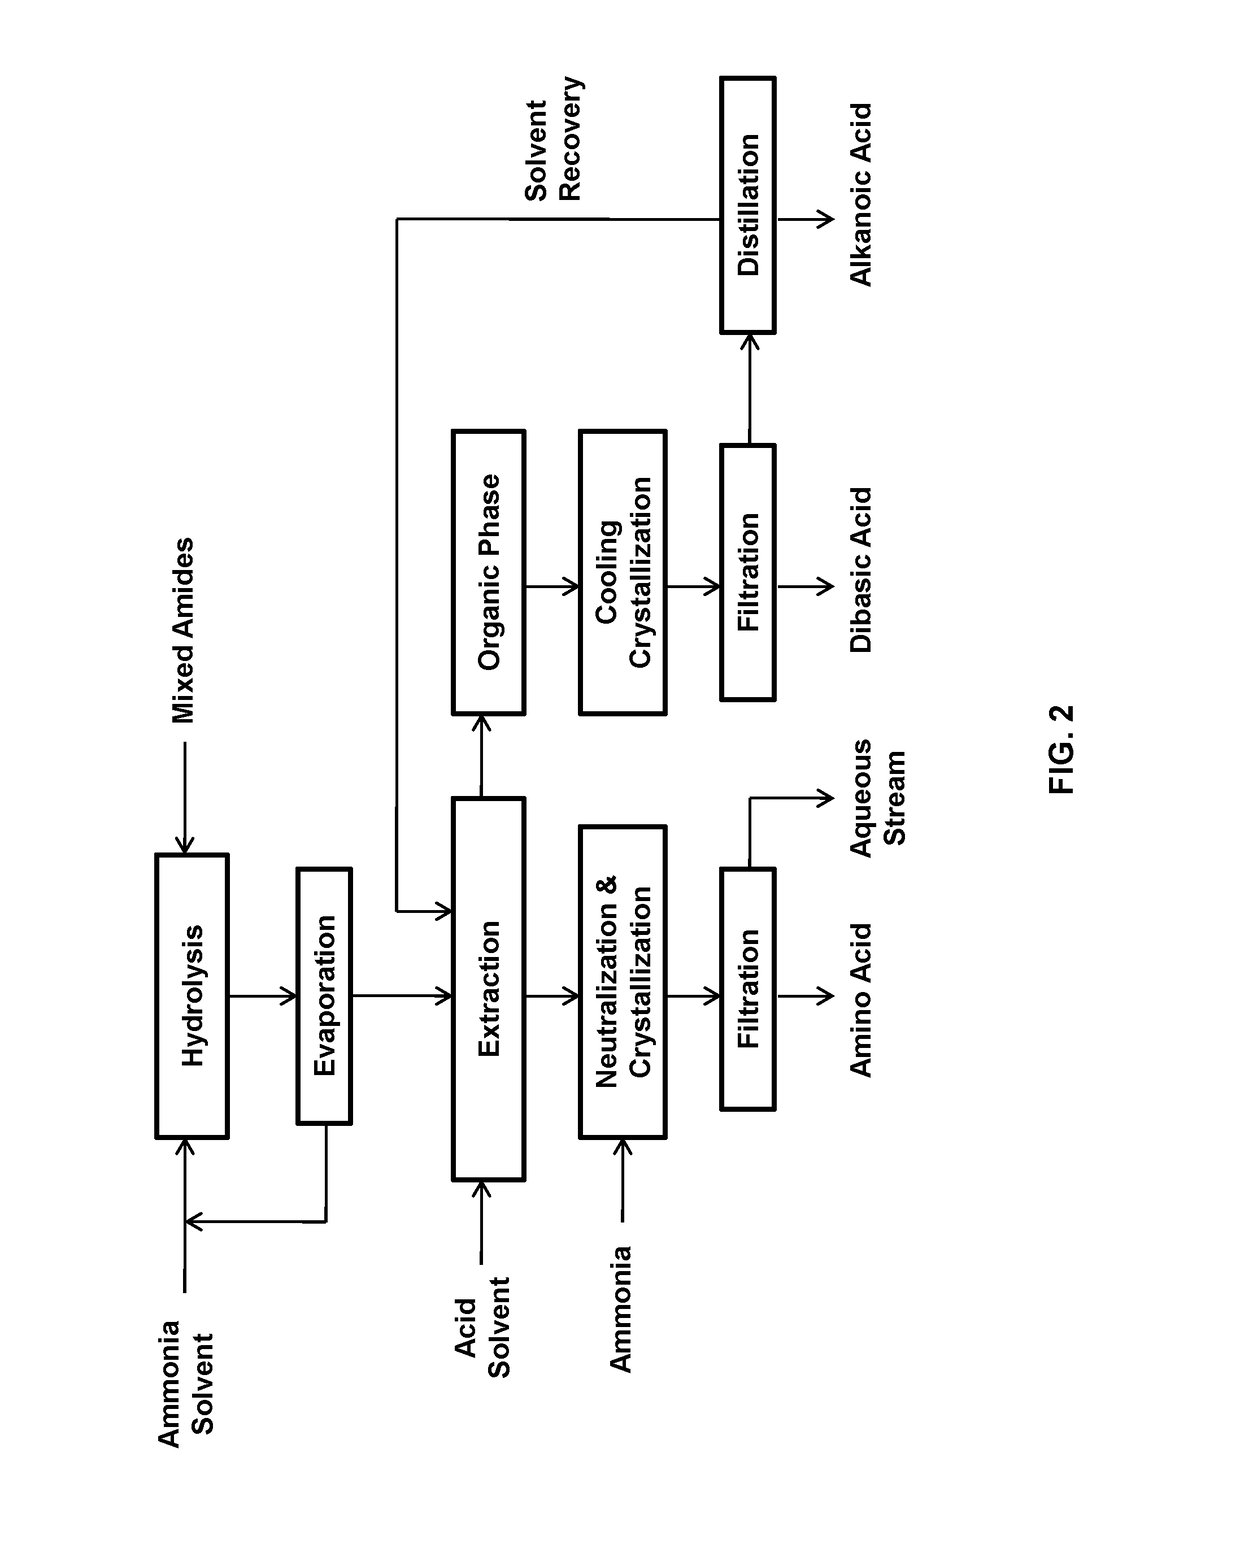 Process for producing long chain amino acids and dibasic acids